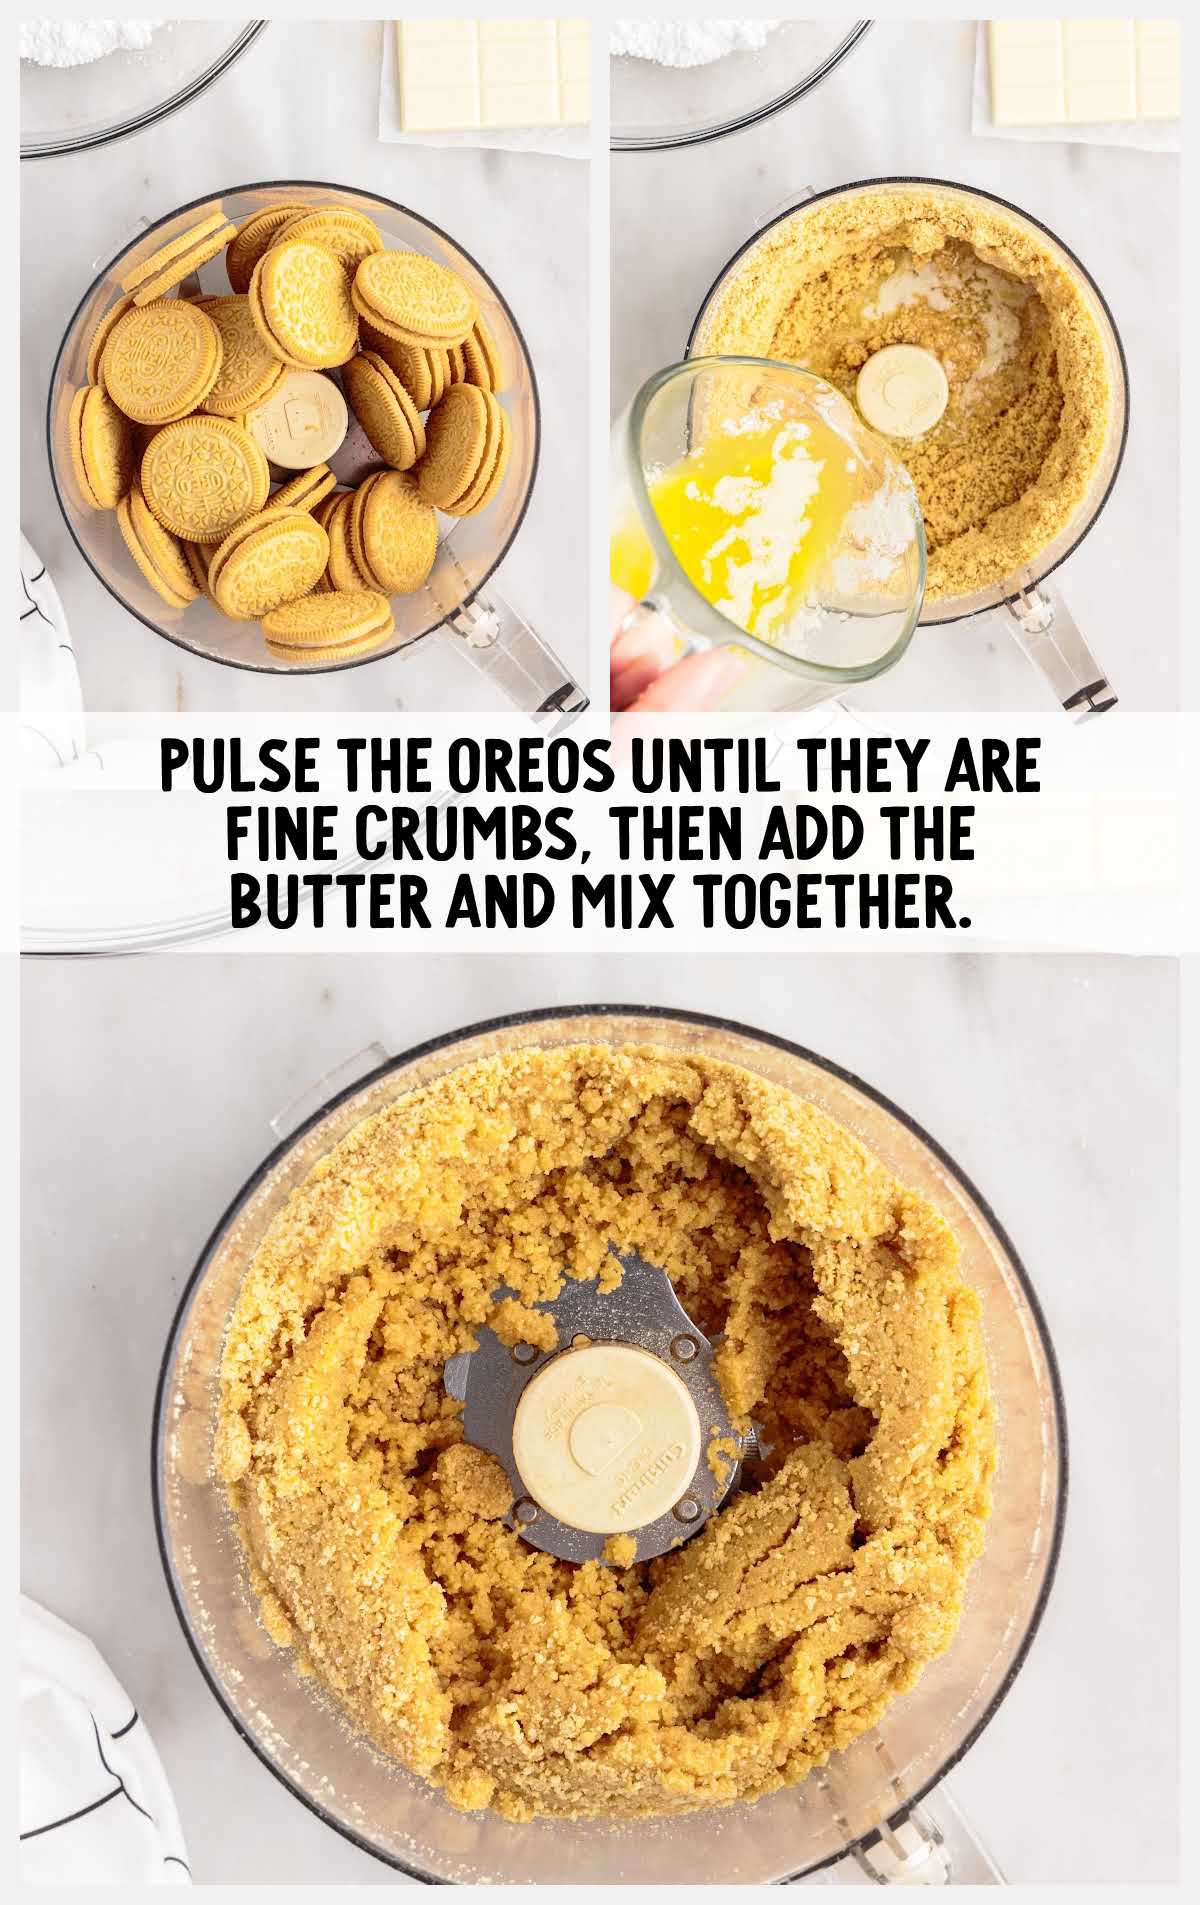 oreos pulsed until fine crumbs and then butter added and mixed together